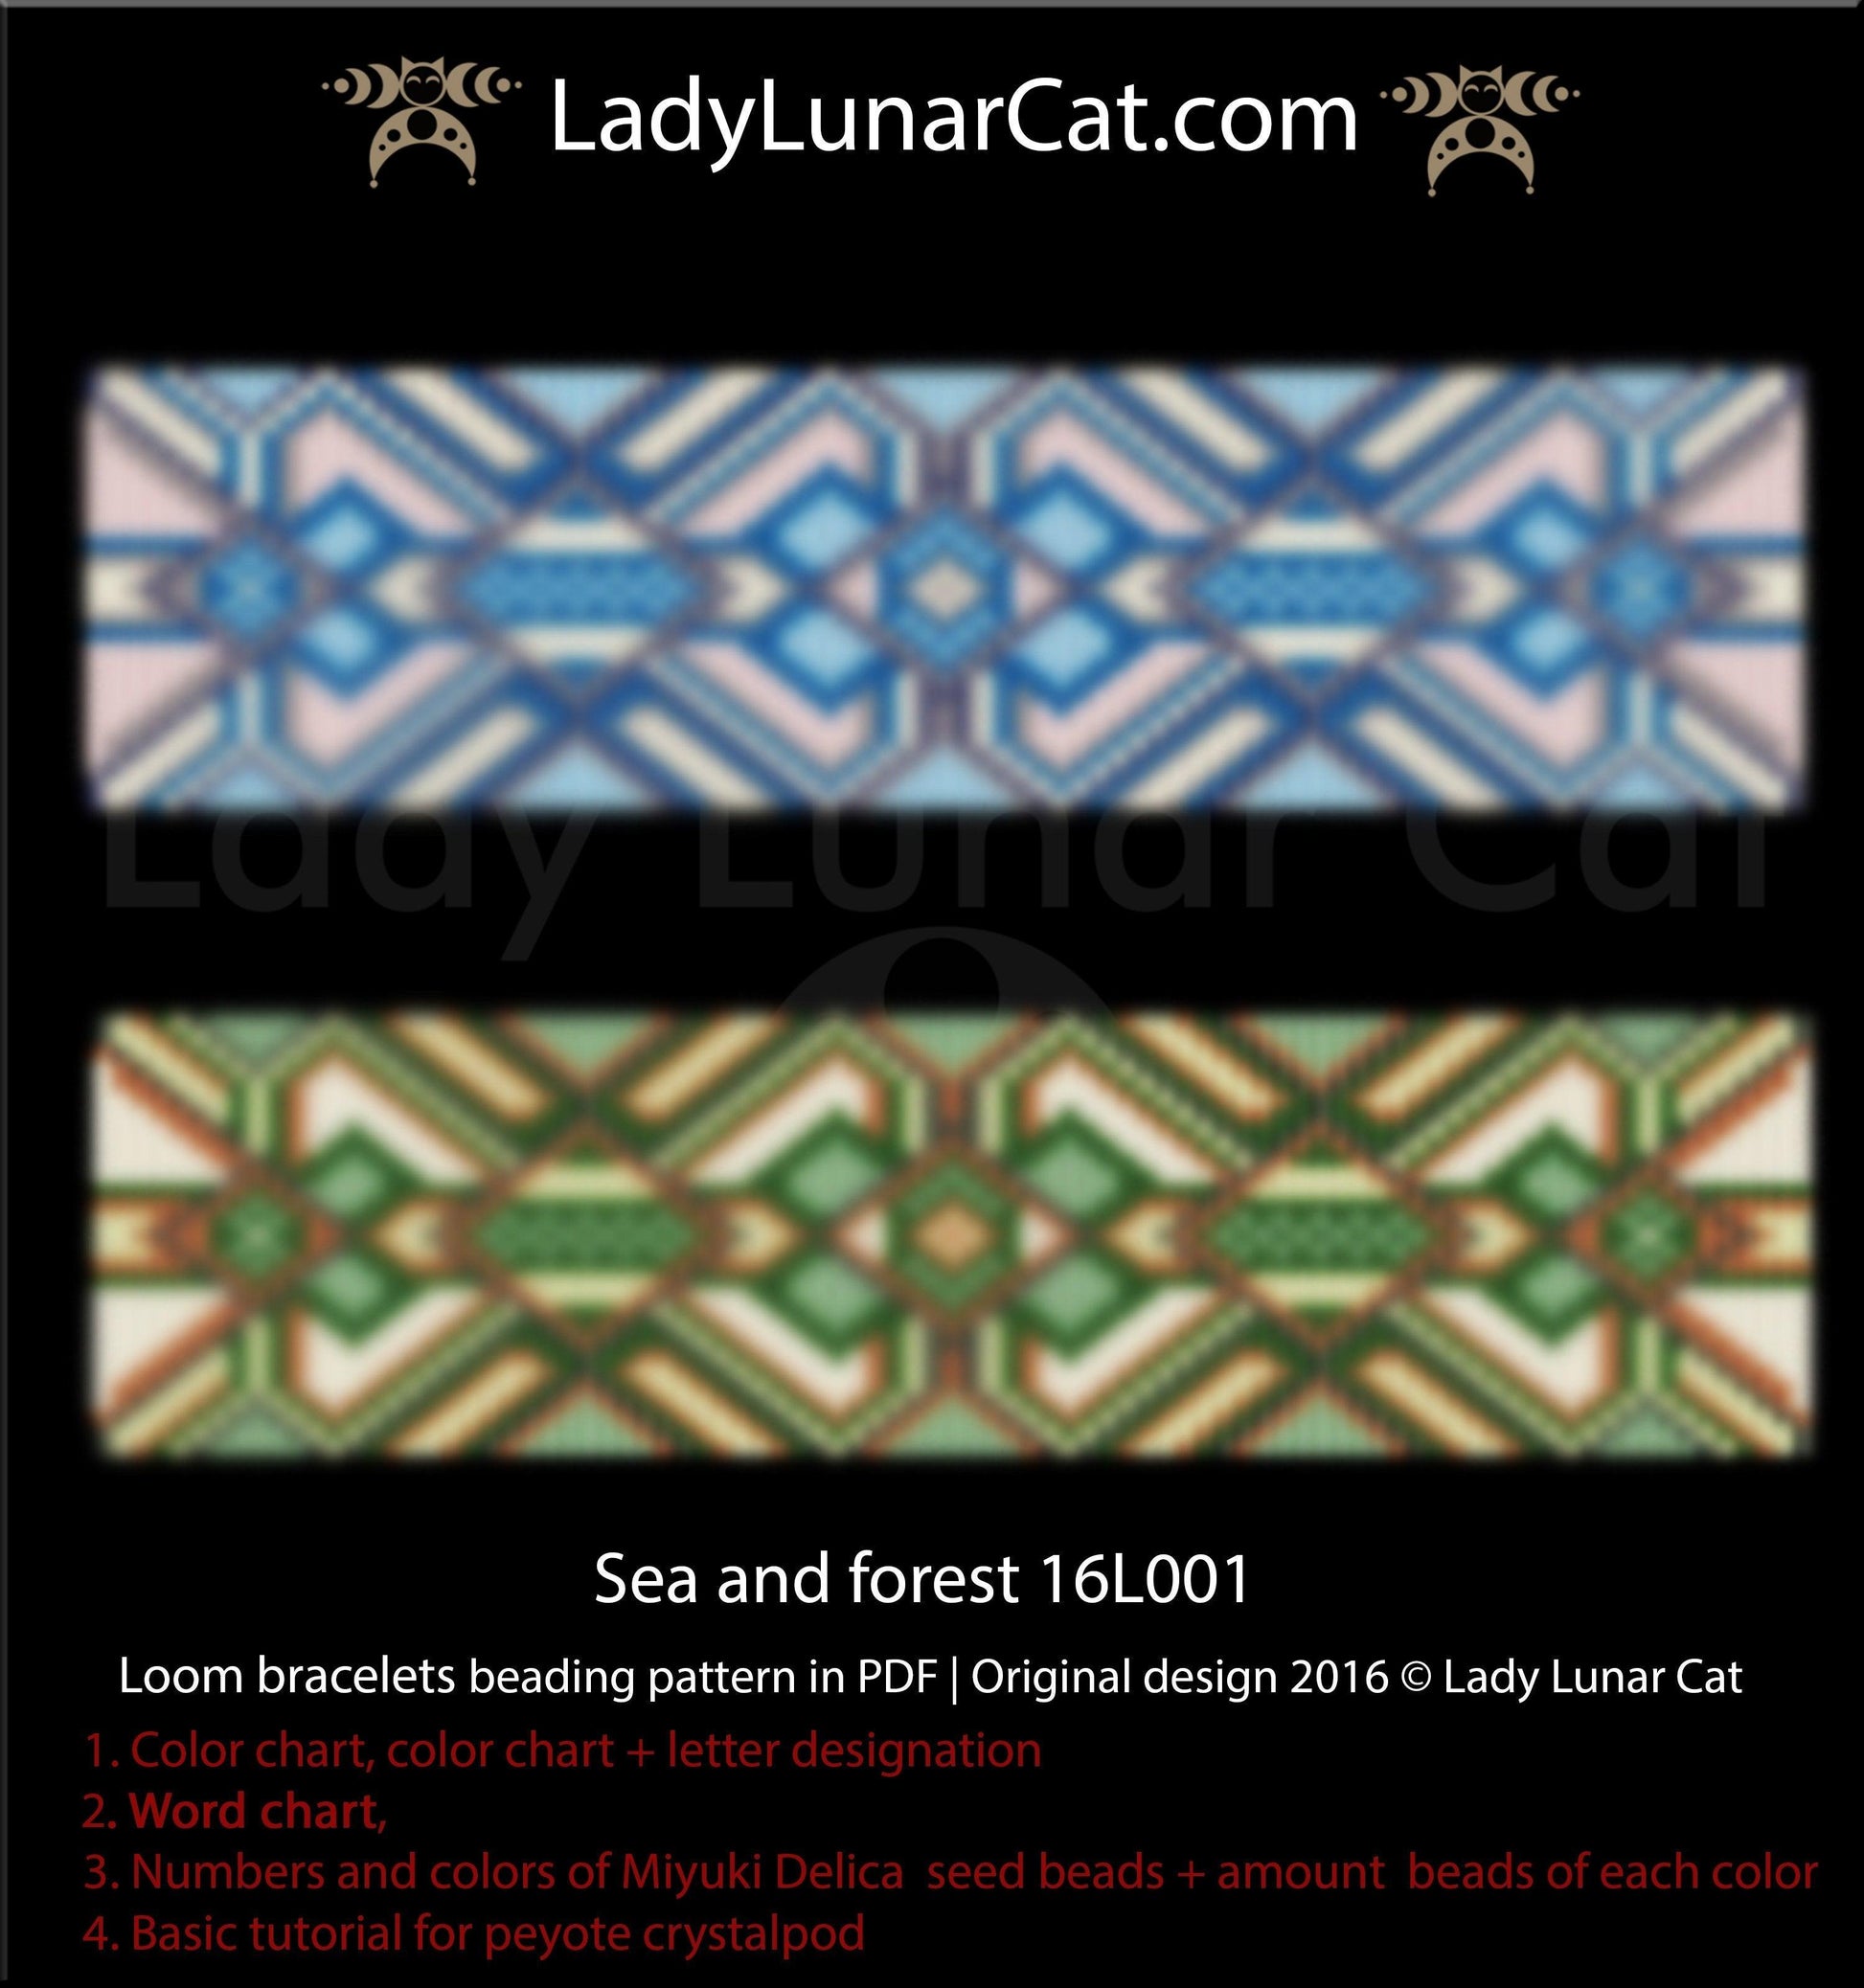 Bead loom pattern for bracelets - Sea and forest